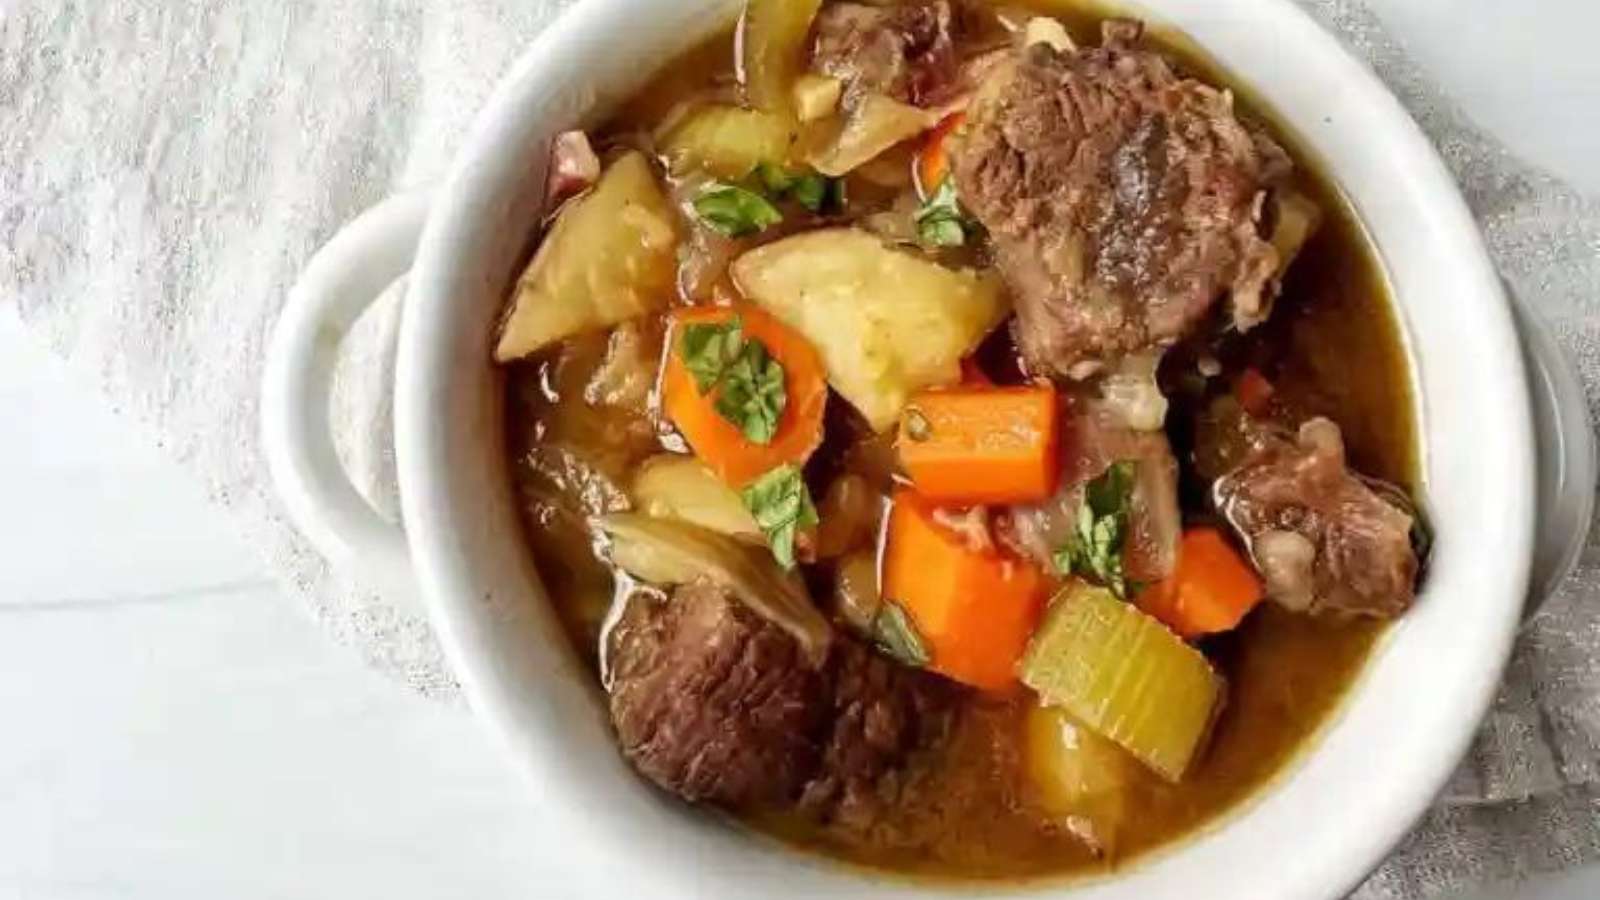 Beef stew in a white bowl with carrots and potatoes.